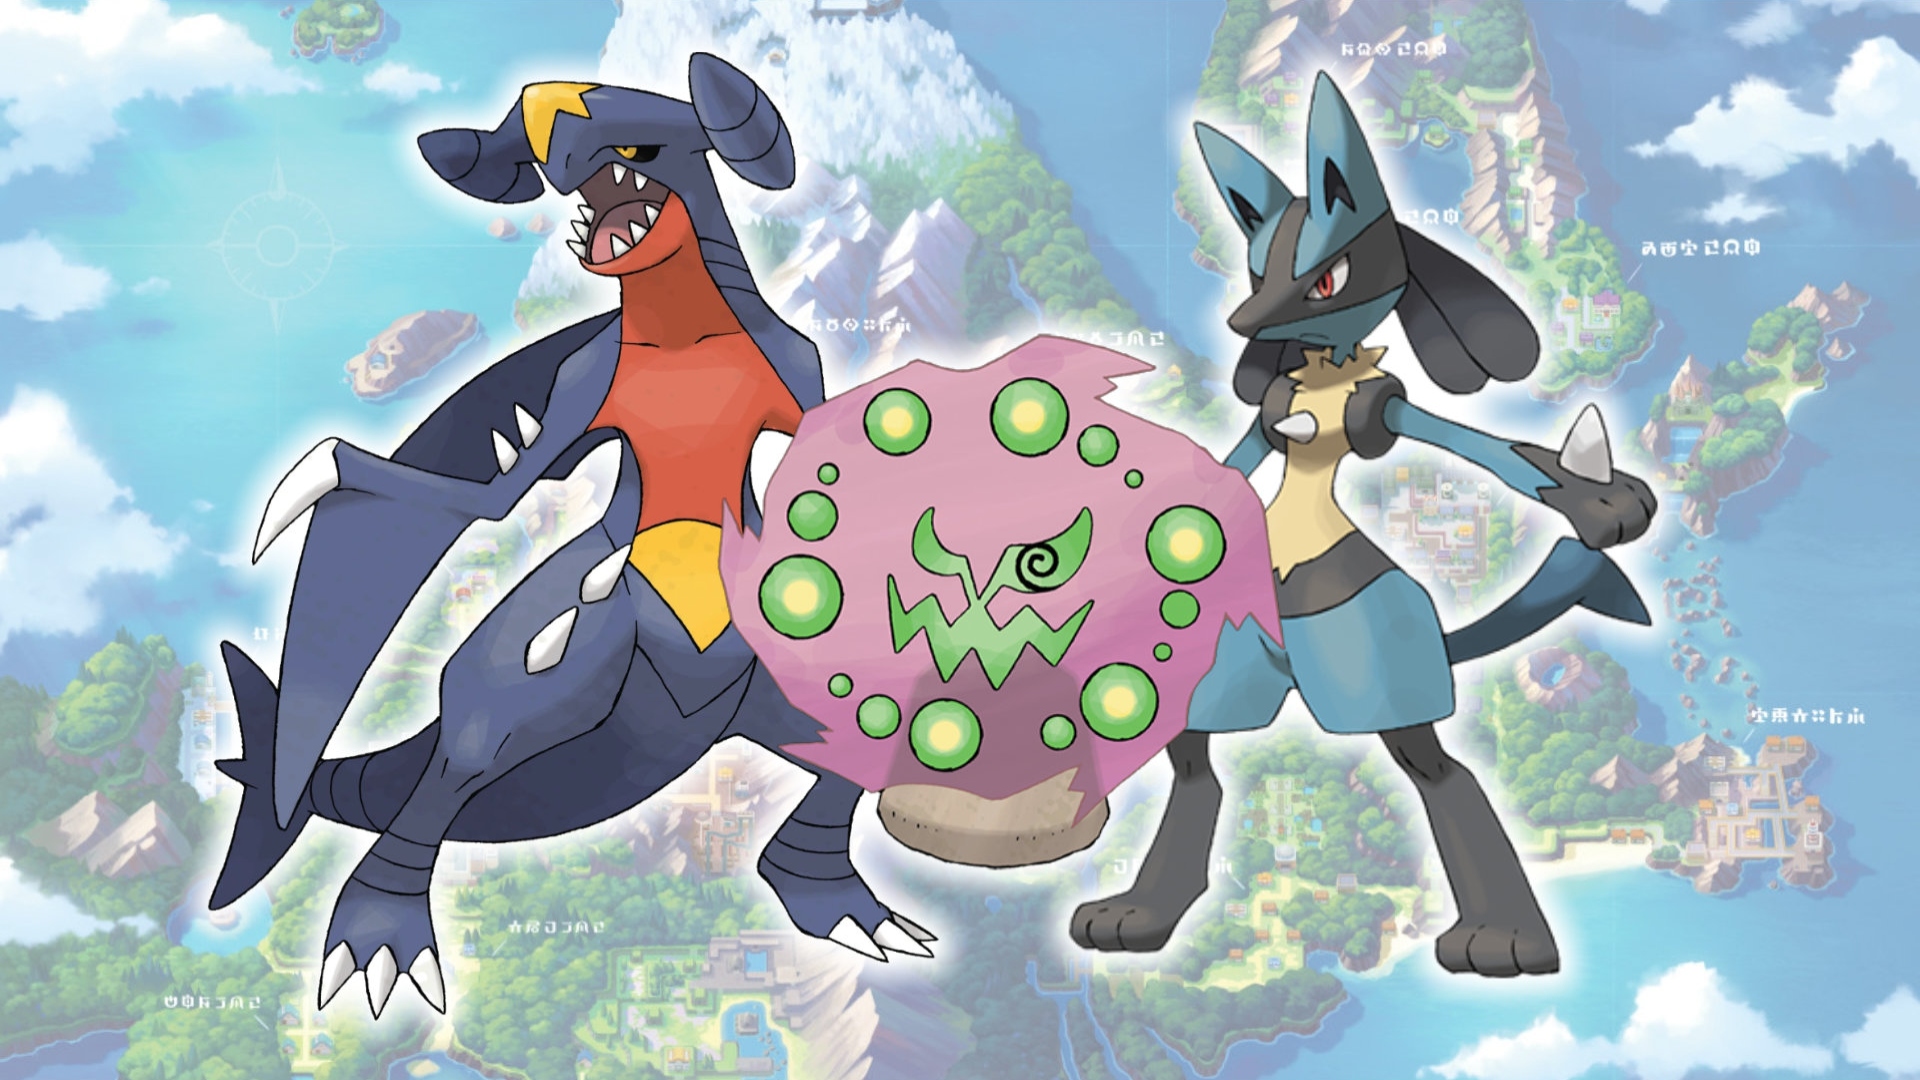 Pokemon: 10 Things You Didn't Know About Lucario